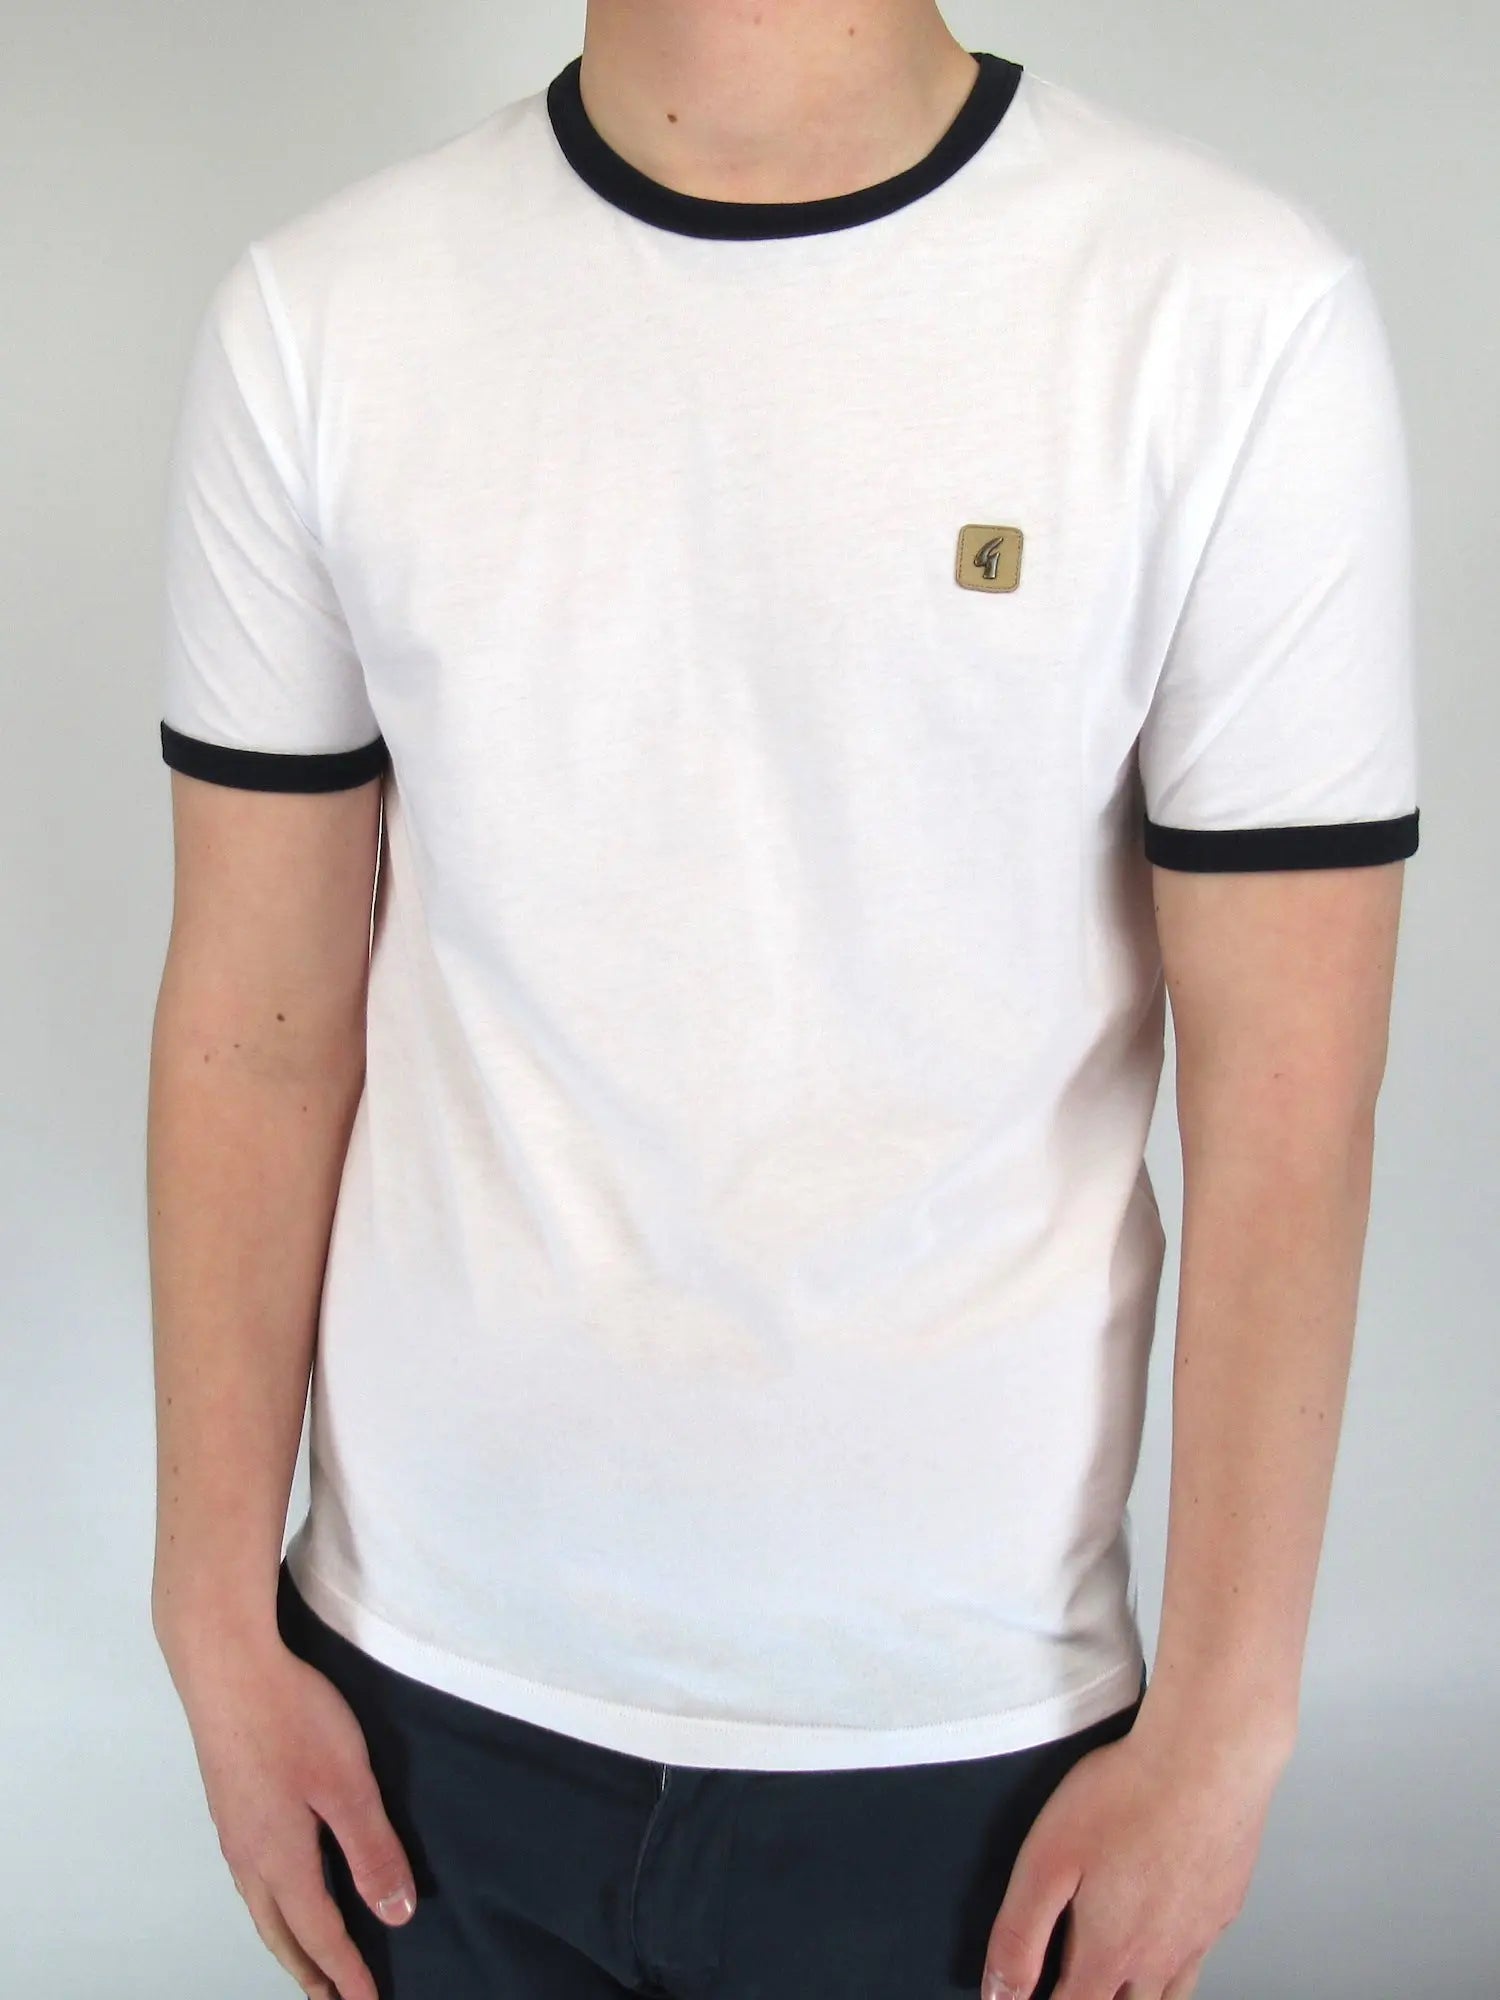 Gabicci Vintage Ringer White With Navy Trim T-Shirt From Woven Durham